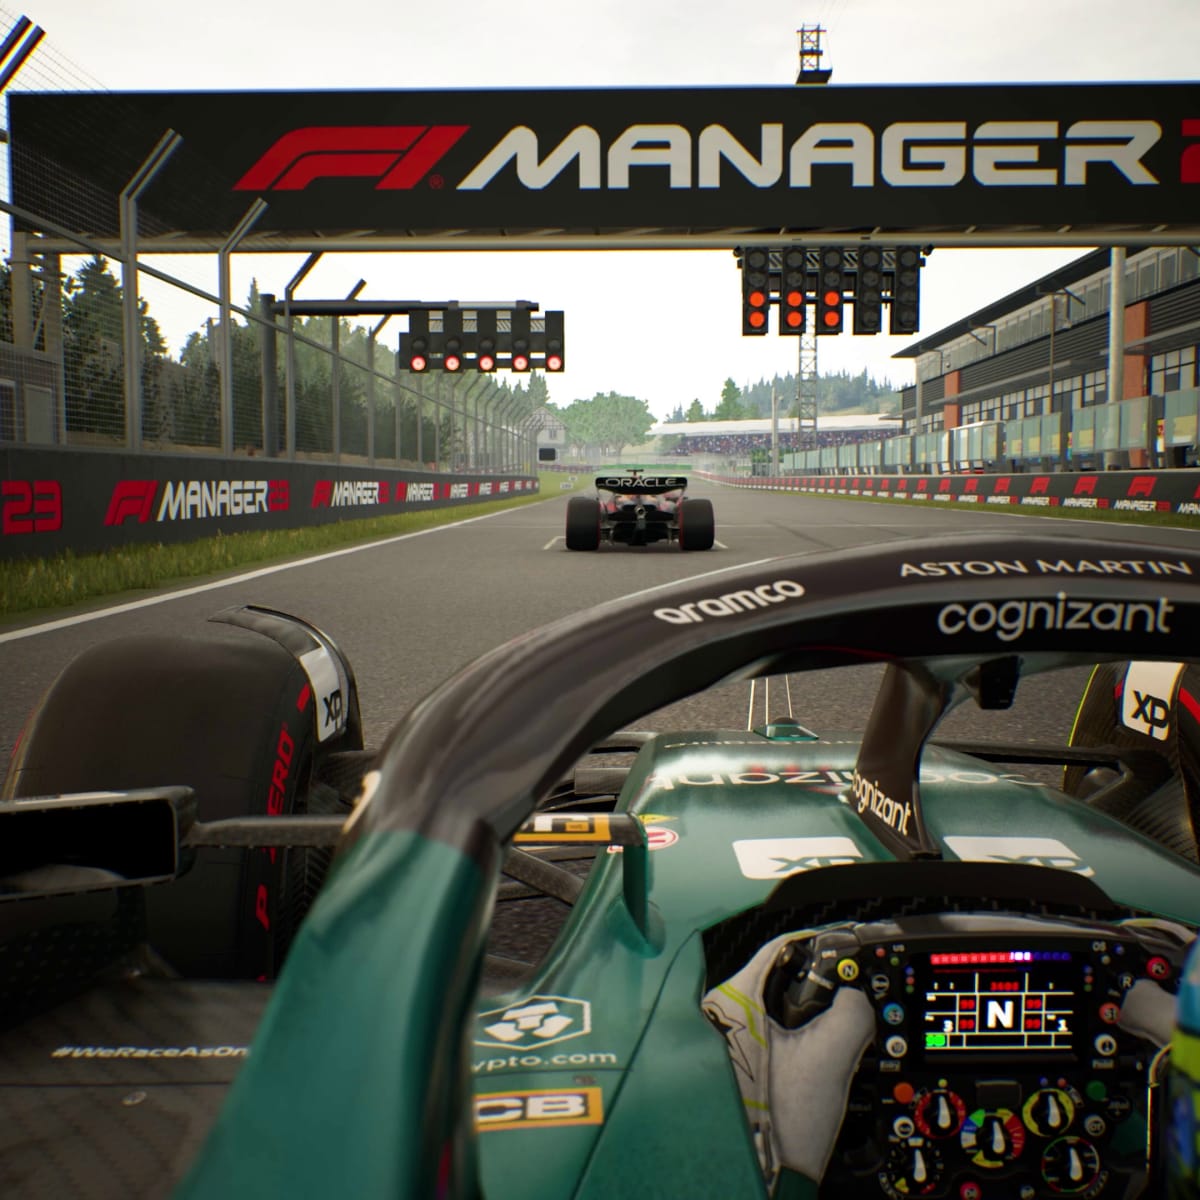 How to access the F1 23 game early